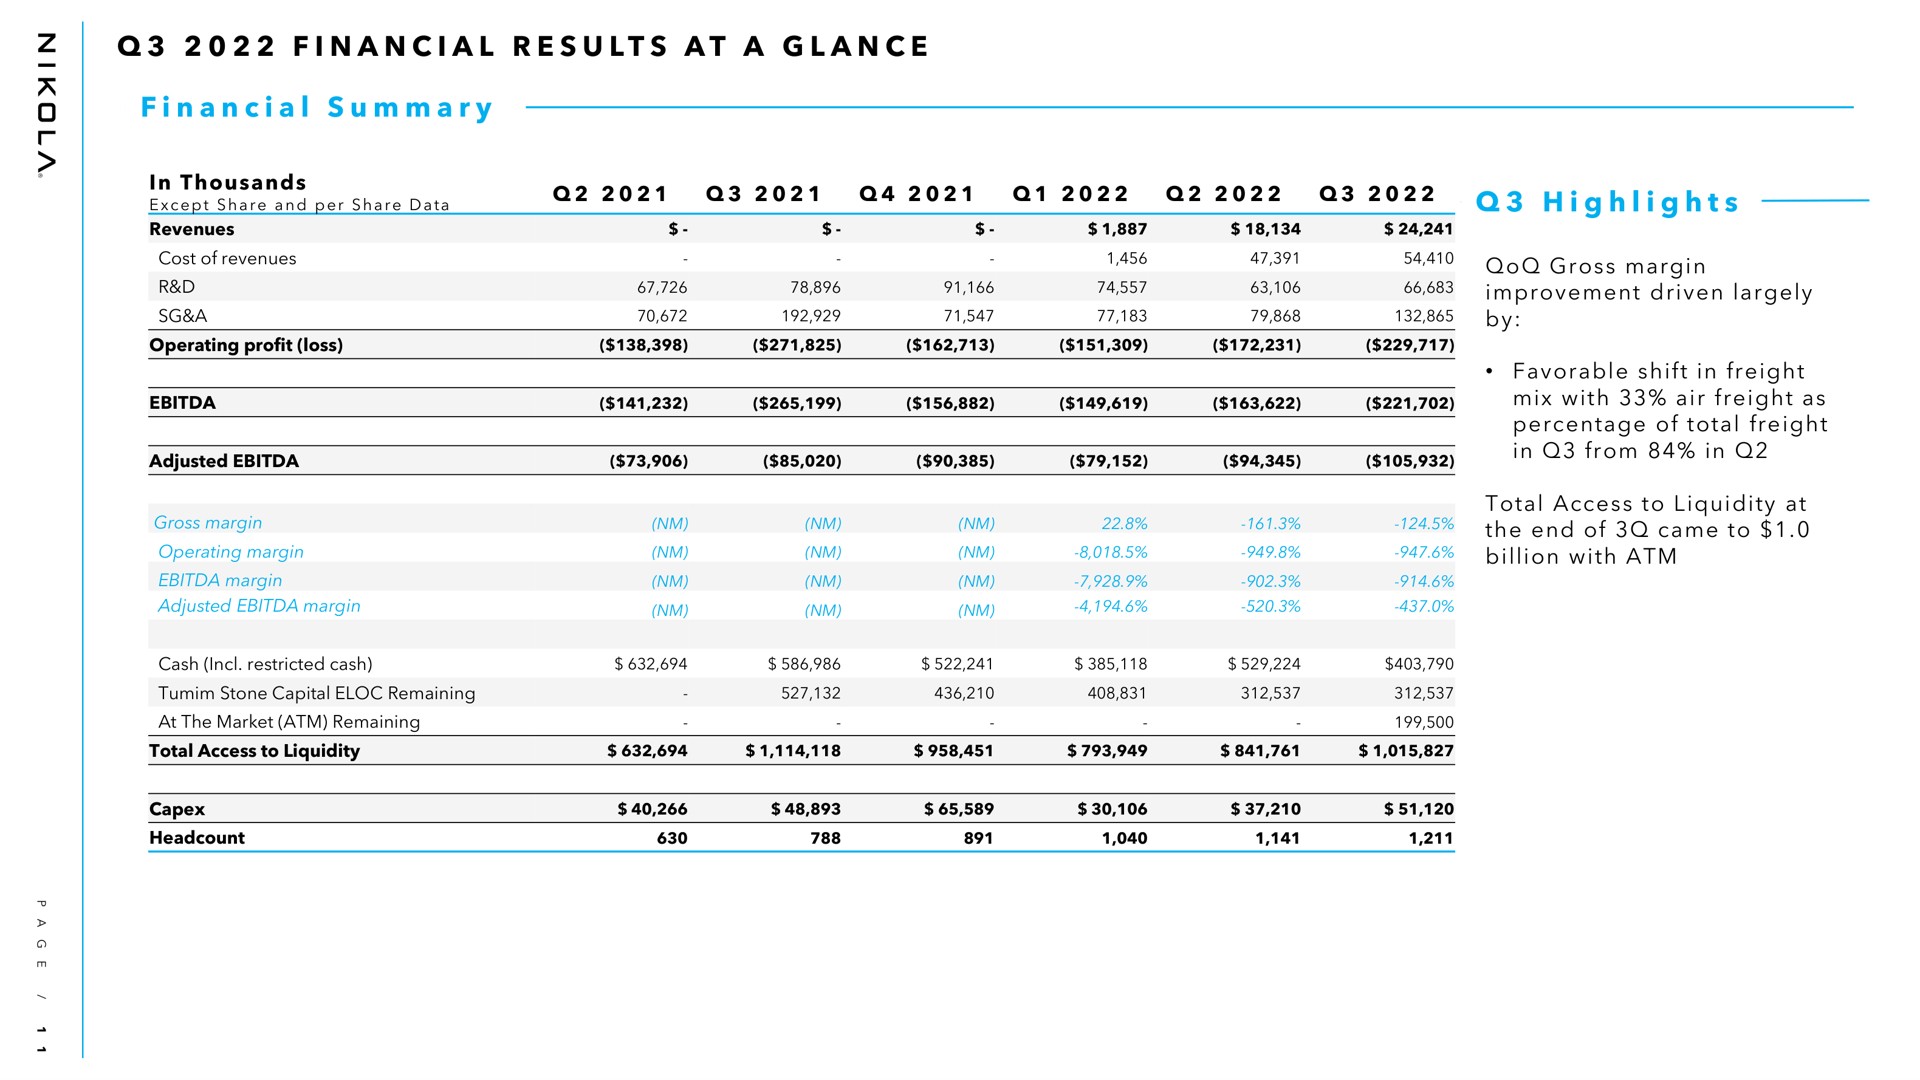 i a i a a a a i a i a a i i financial results at glance financial summary highlights gross margin improvement driven largely by favorable shift in freight mix with air freight as percentage of total freight in from in total access to liquidity at the end of came to | Nikola